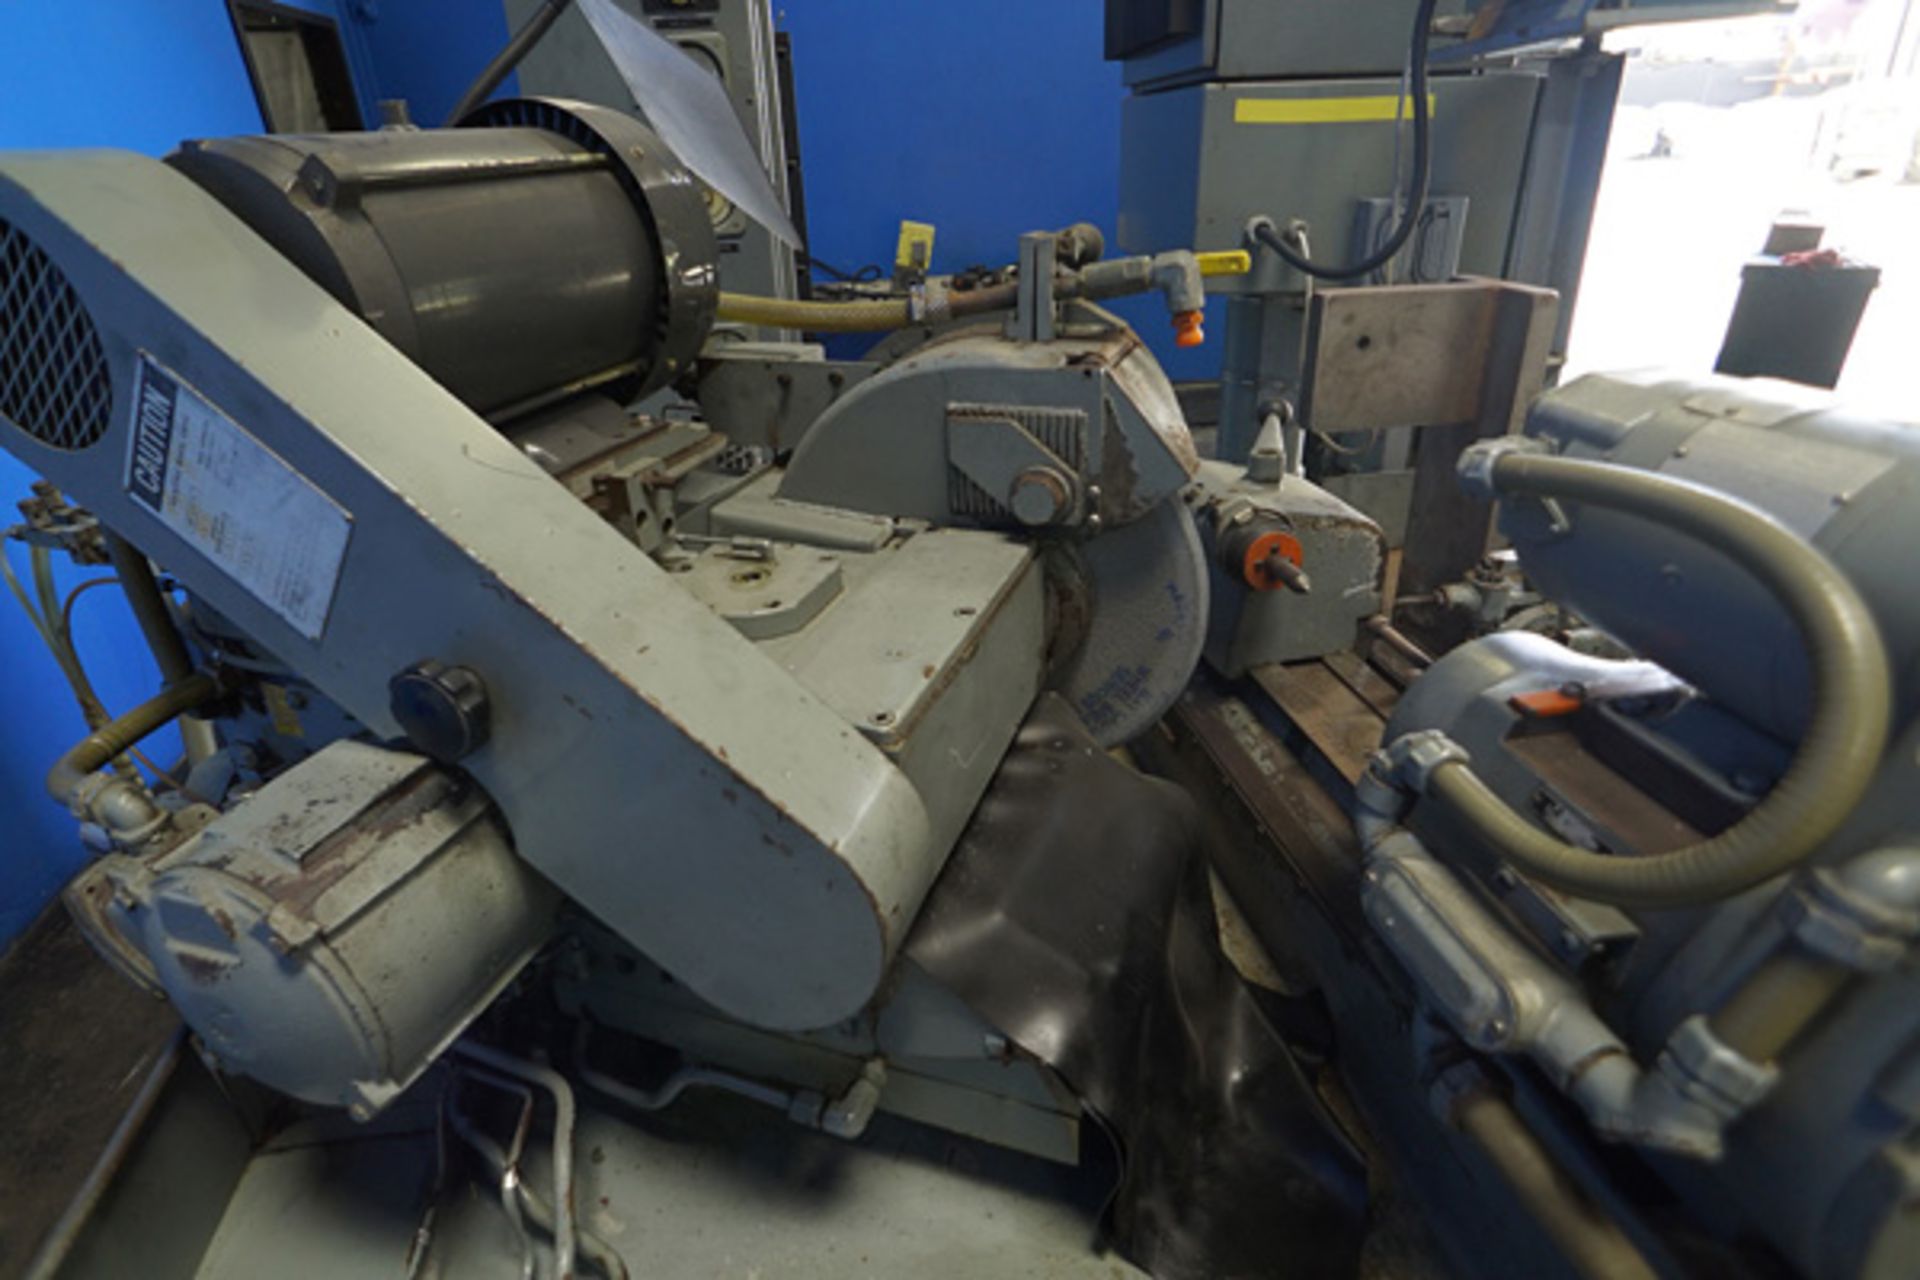 1973 Landis Angle Head Cylindrical Grinder | 10" x 20", Mdl: 1R, S/N: T-884-73 - 5040HP - Image 9 of 9